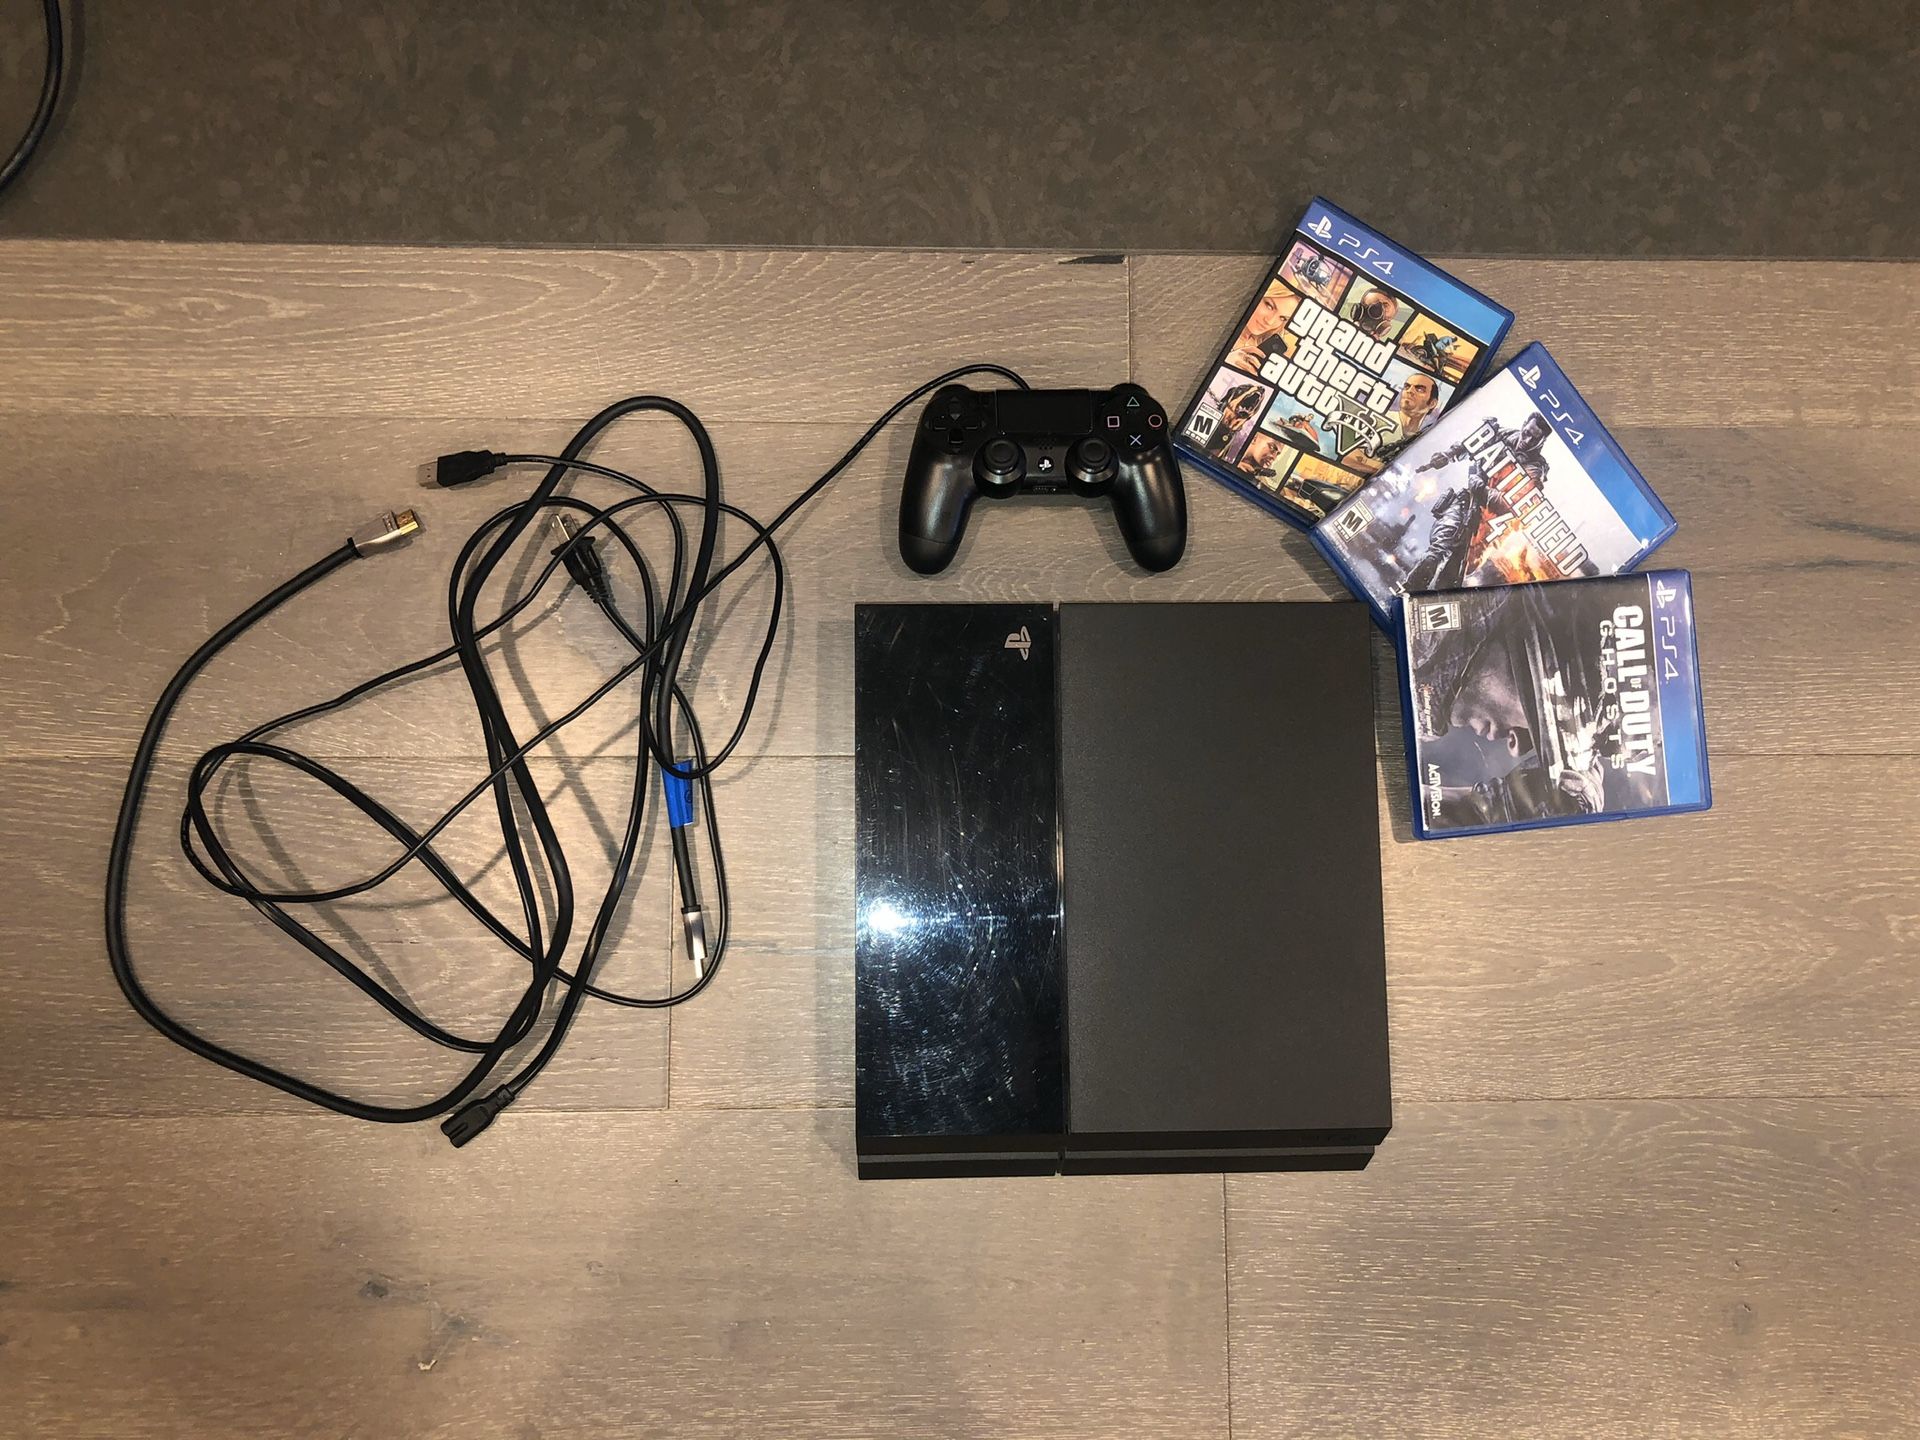 PS4 (with 3 games)